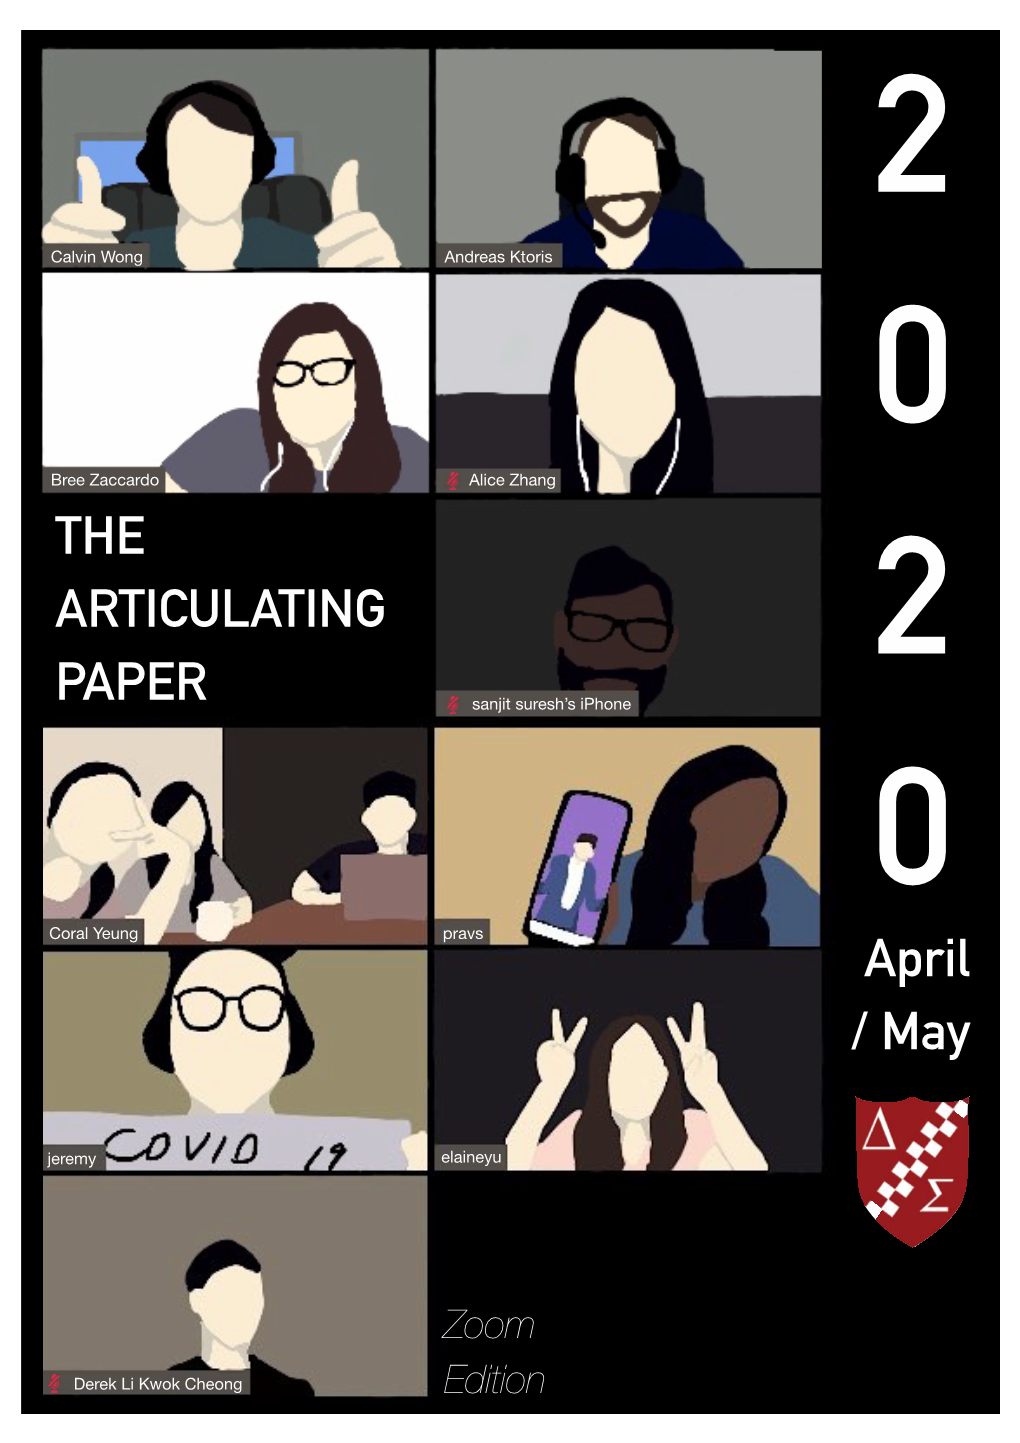 The Articulating Paper April/May 2020